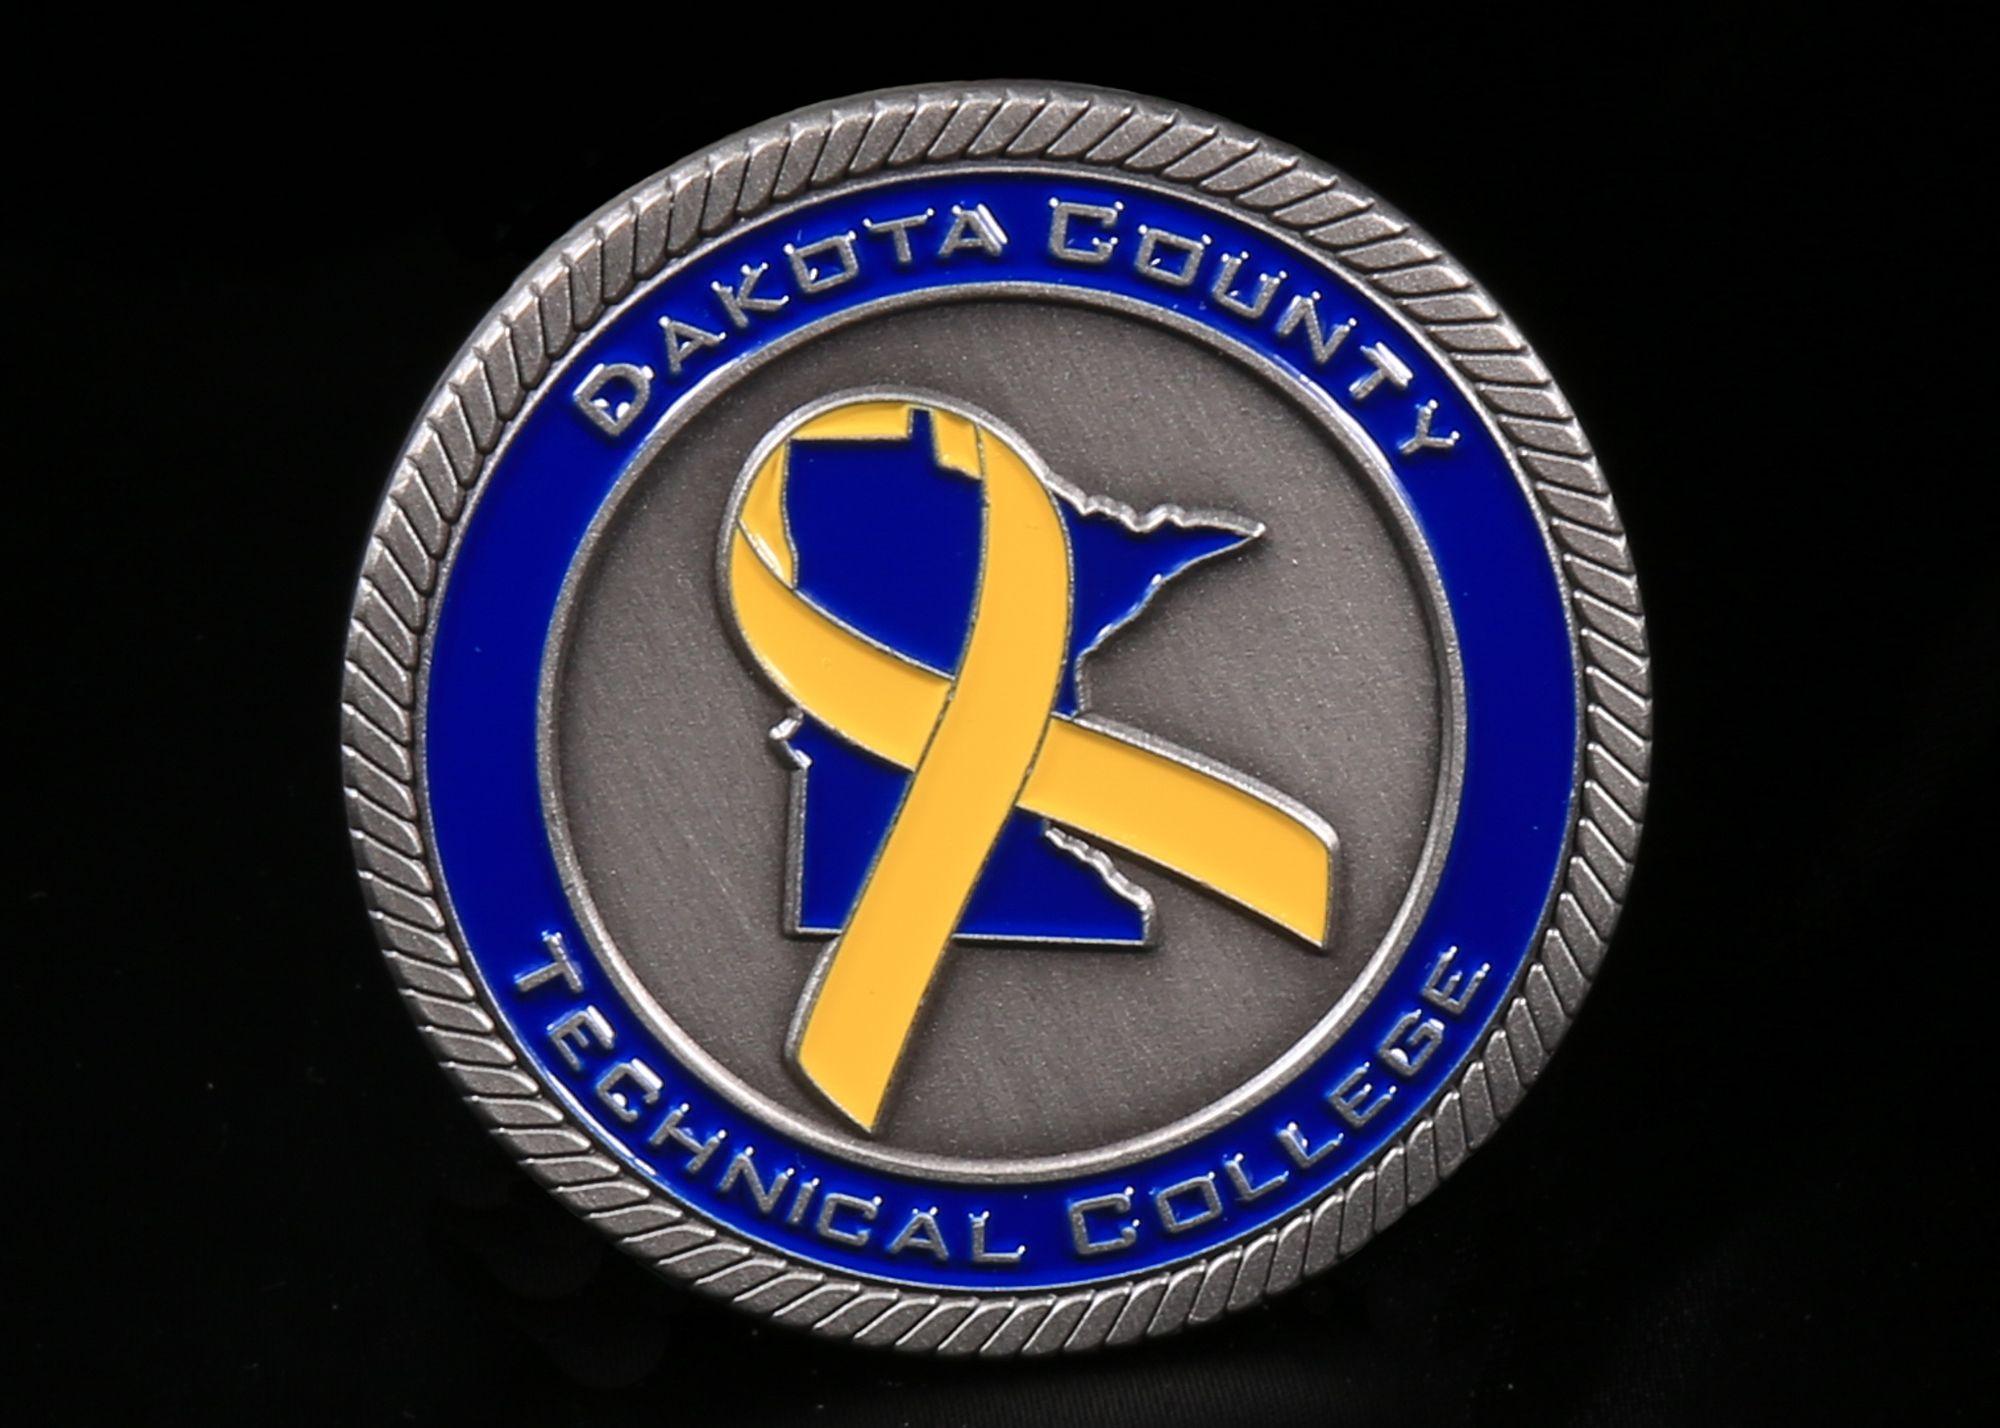 Blue and Yellow Ribbon Logo - Beyond the Yellow Ribbon Challenge Coins